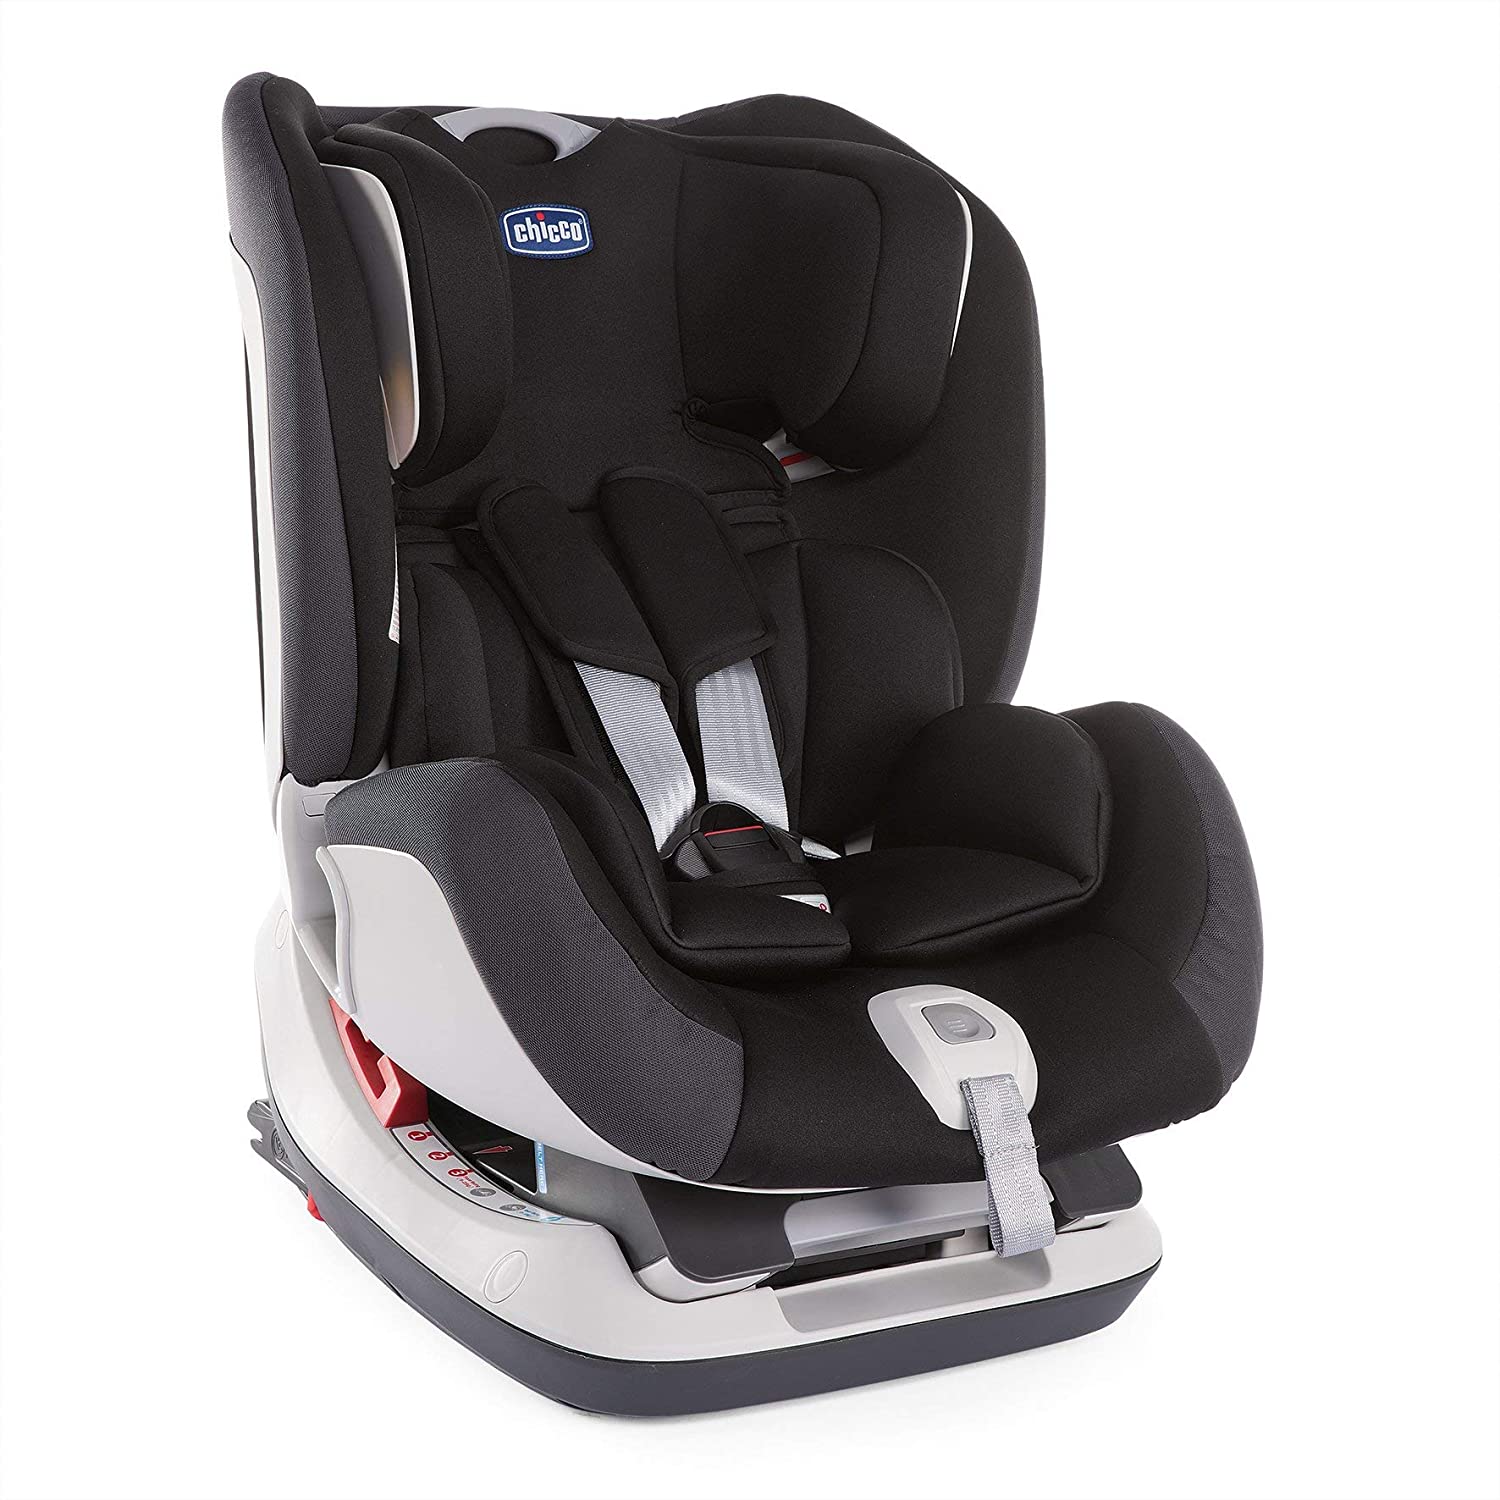 Chicco 08079828510700 Child Car Seat Seat-Up 012 Black